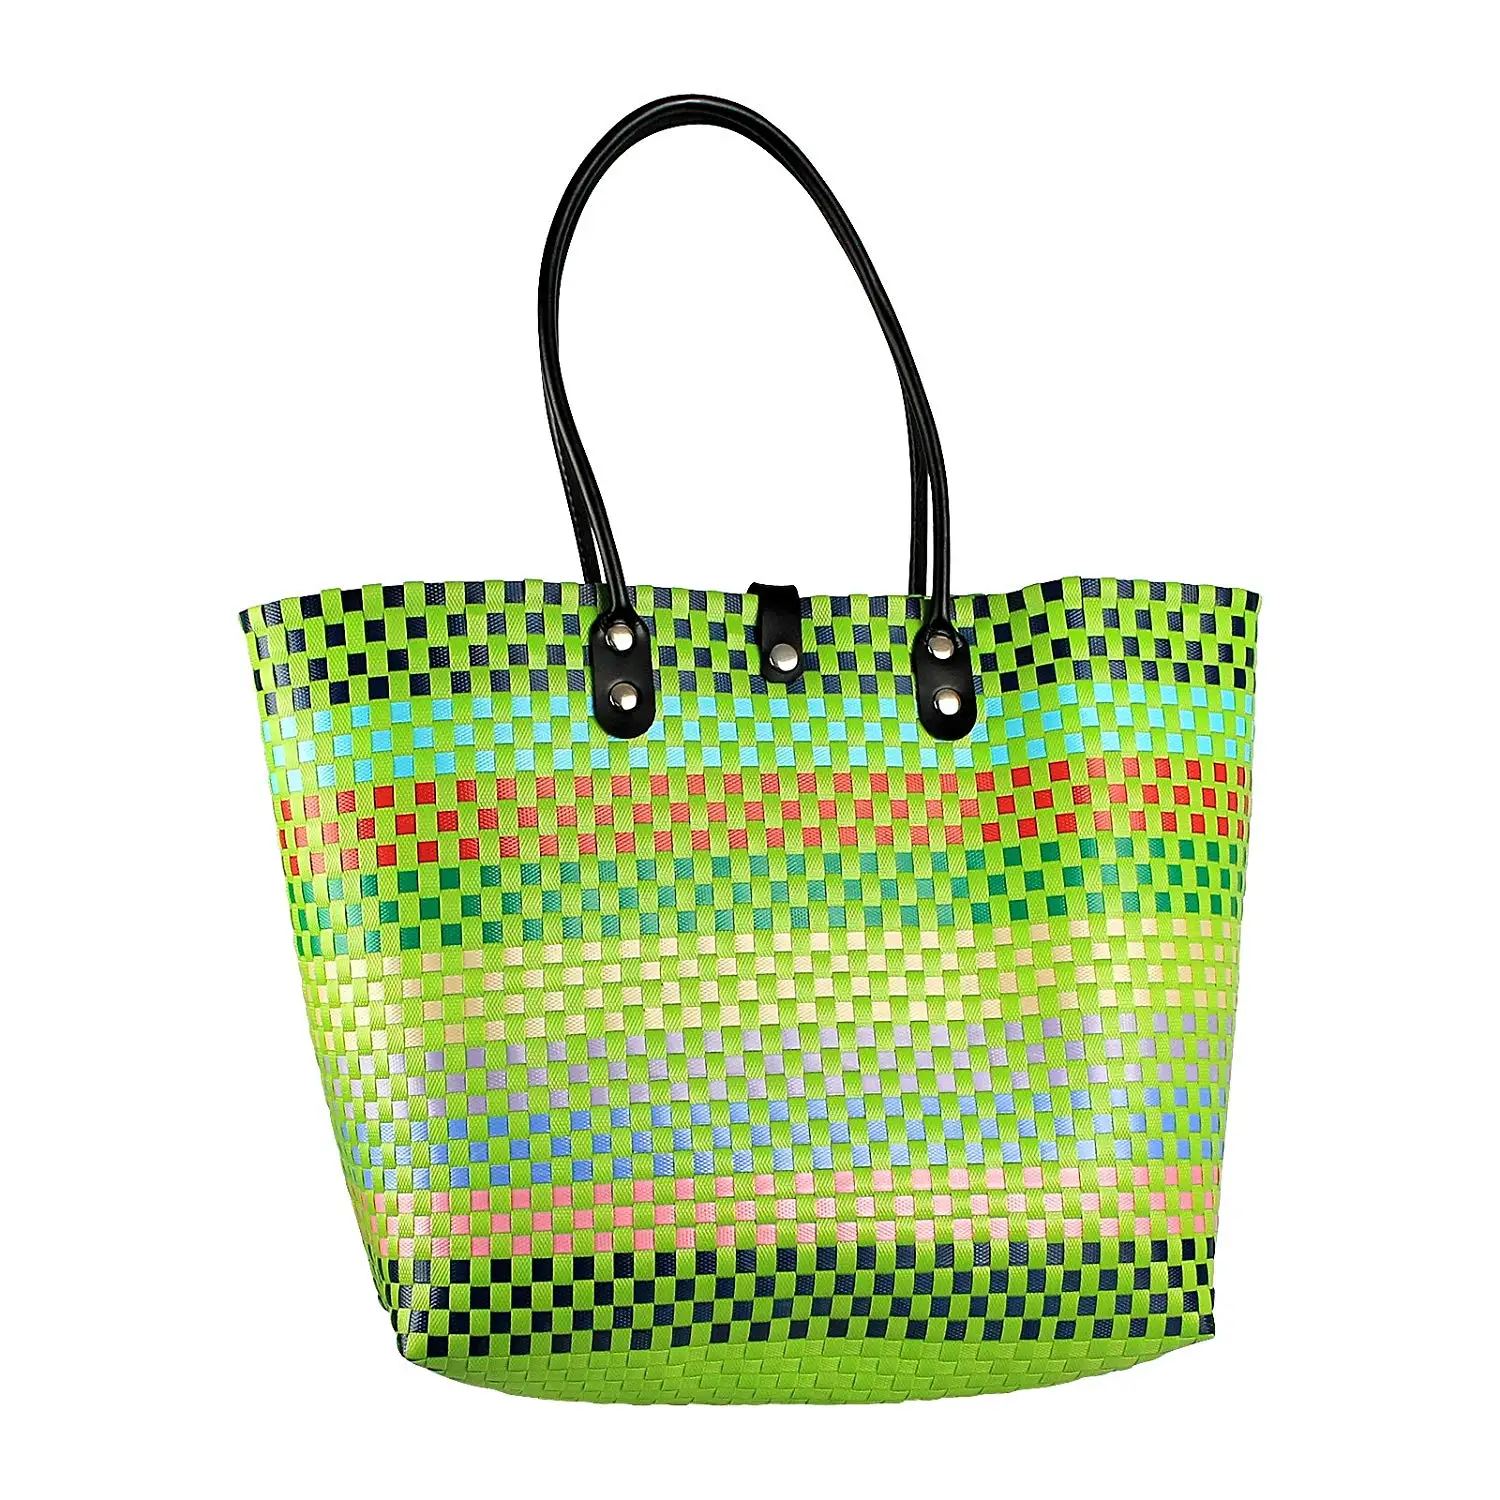 Cheap Recycled Plastic Tote Bag, find Recycled Plastic Tote Bag deals